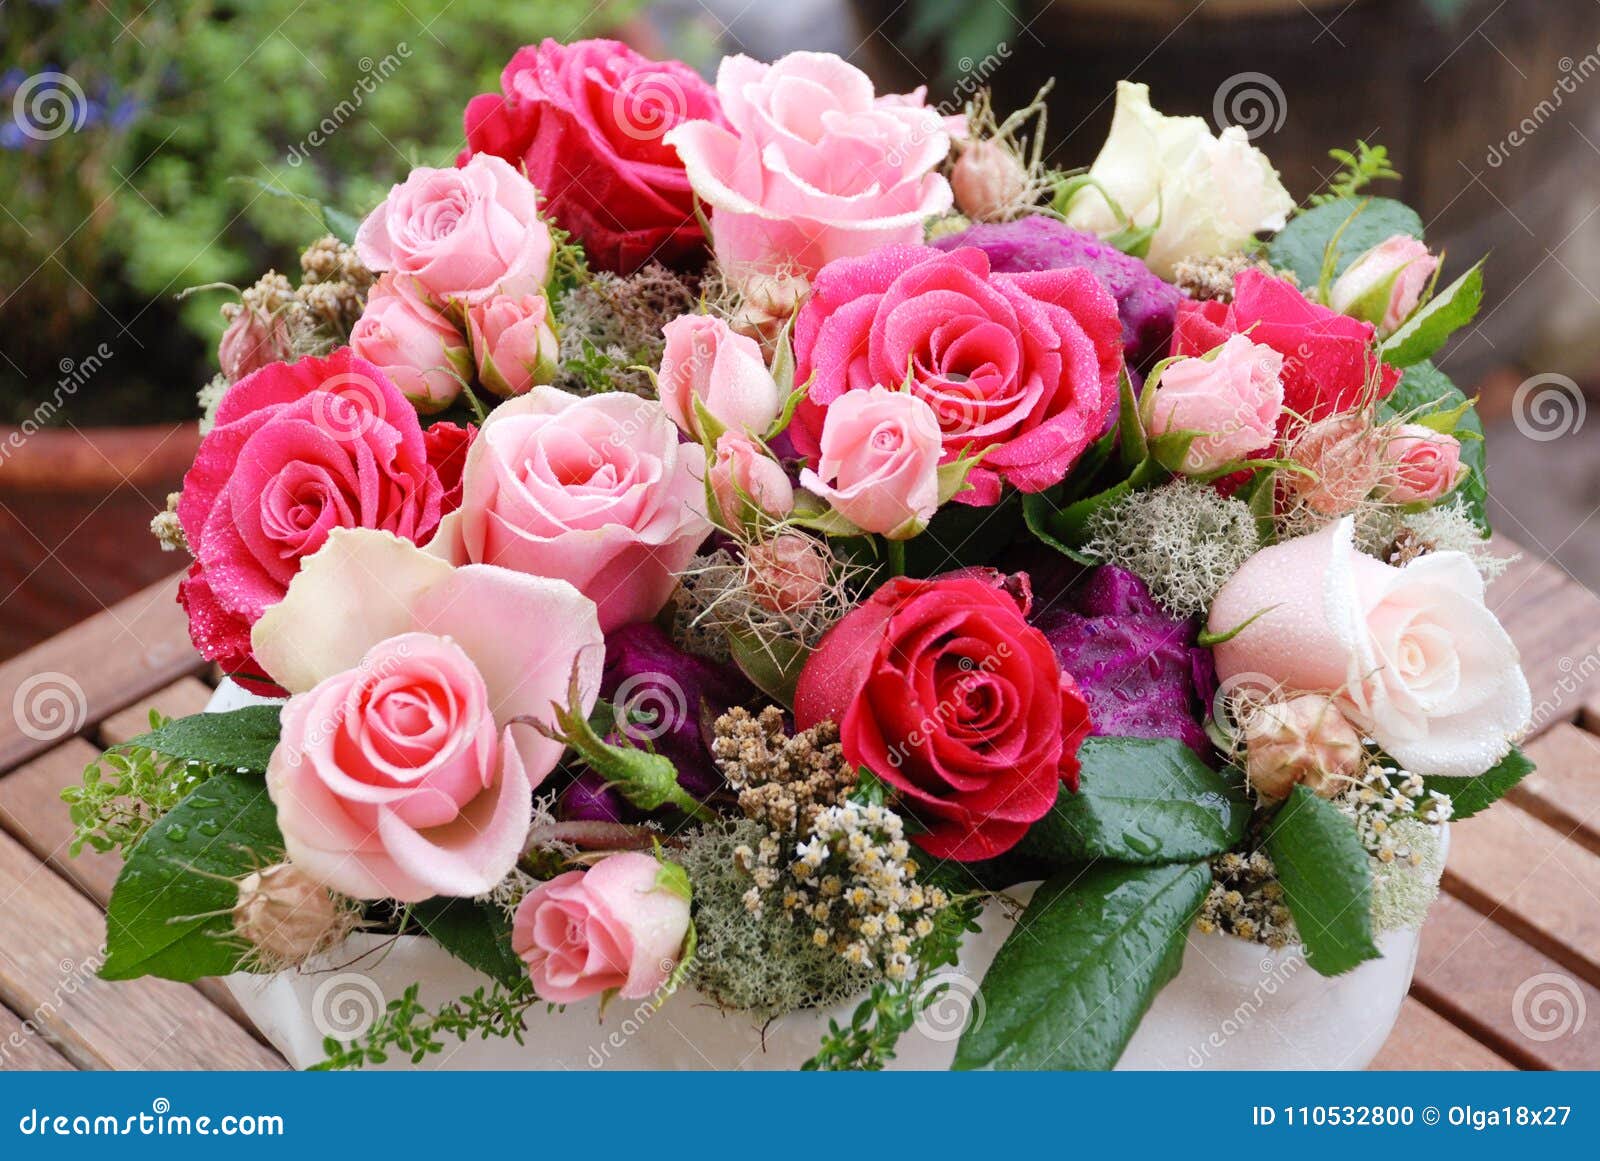 Luxury Bouquet Made of Red Roses in Flower Shop Valentines Bouquet of ...